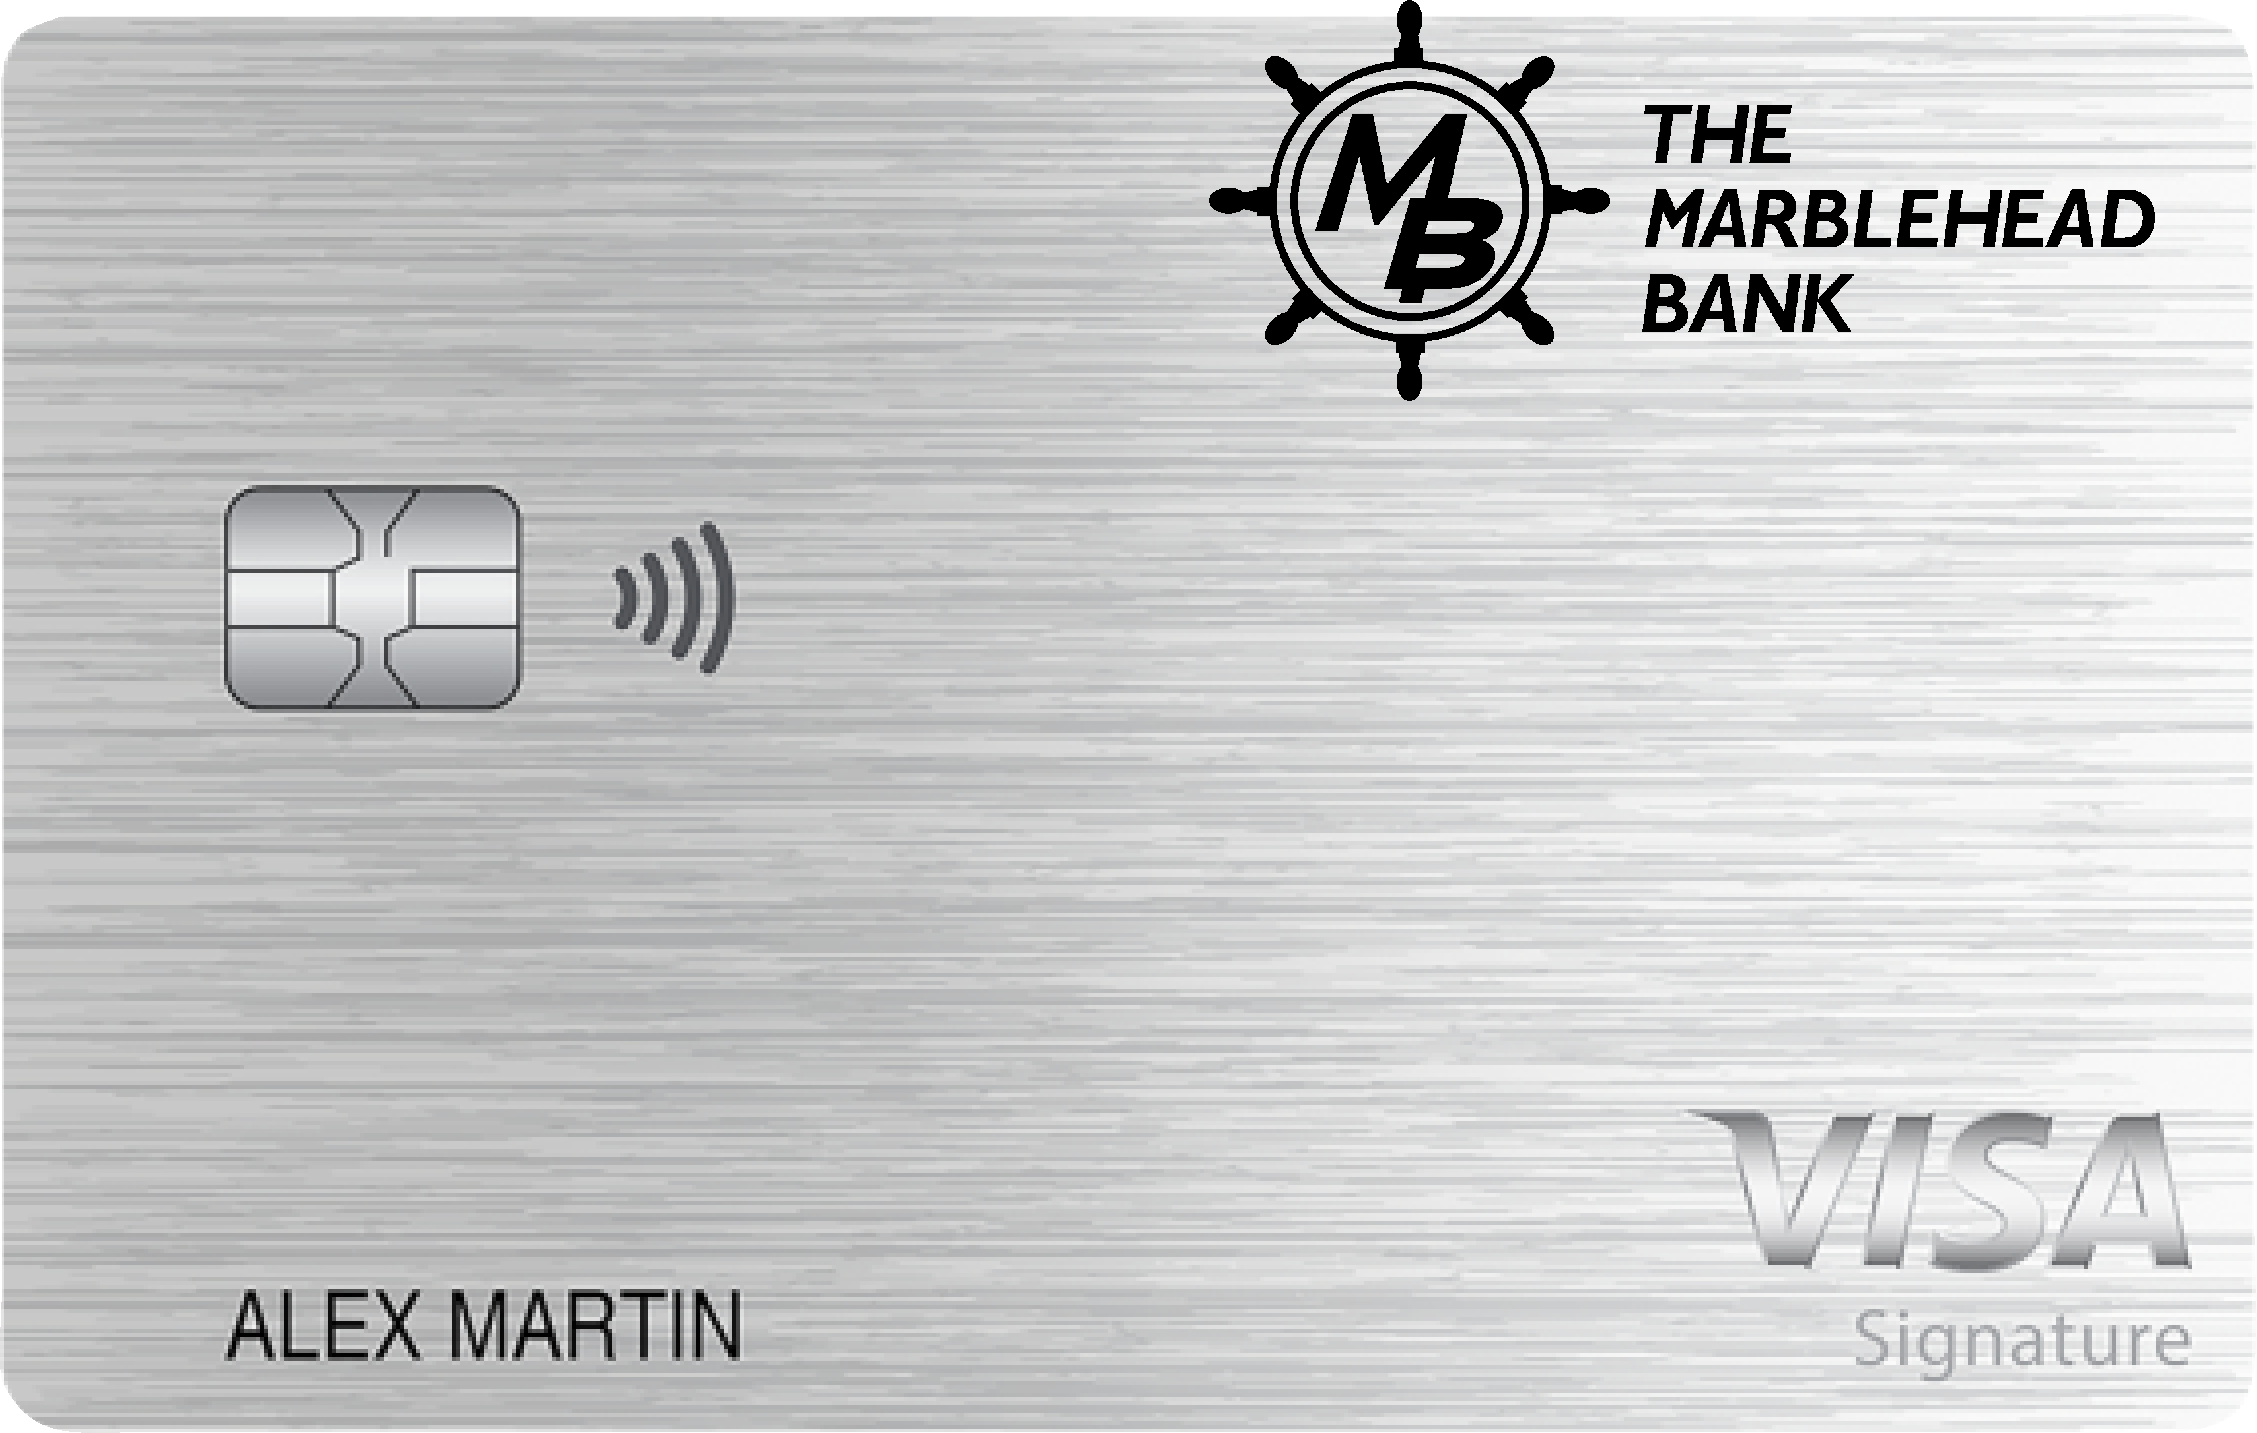 THE MARBLEHEAD BANK Max Cash Preferred Card